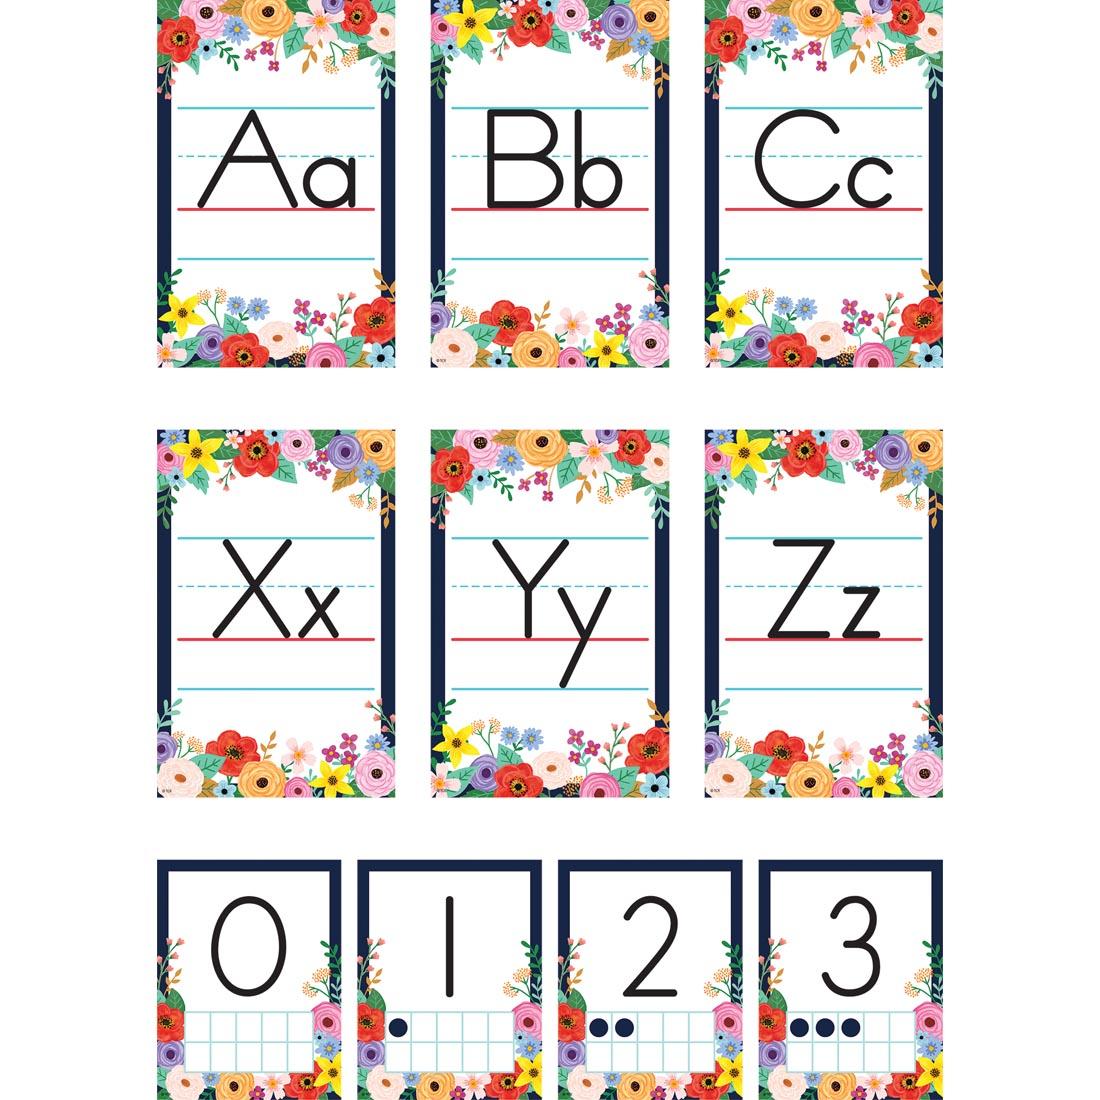 pieces from the Alphabet Bulletin Board Set from the Wildflowers collection by Teacher Created Resources